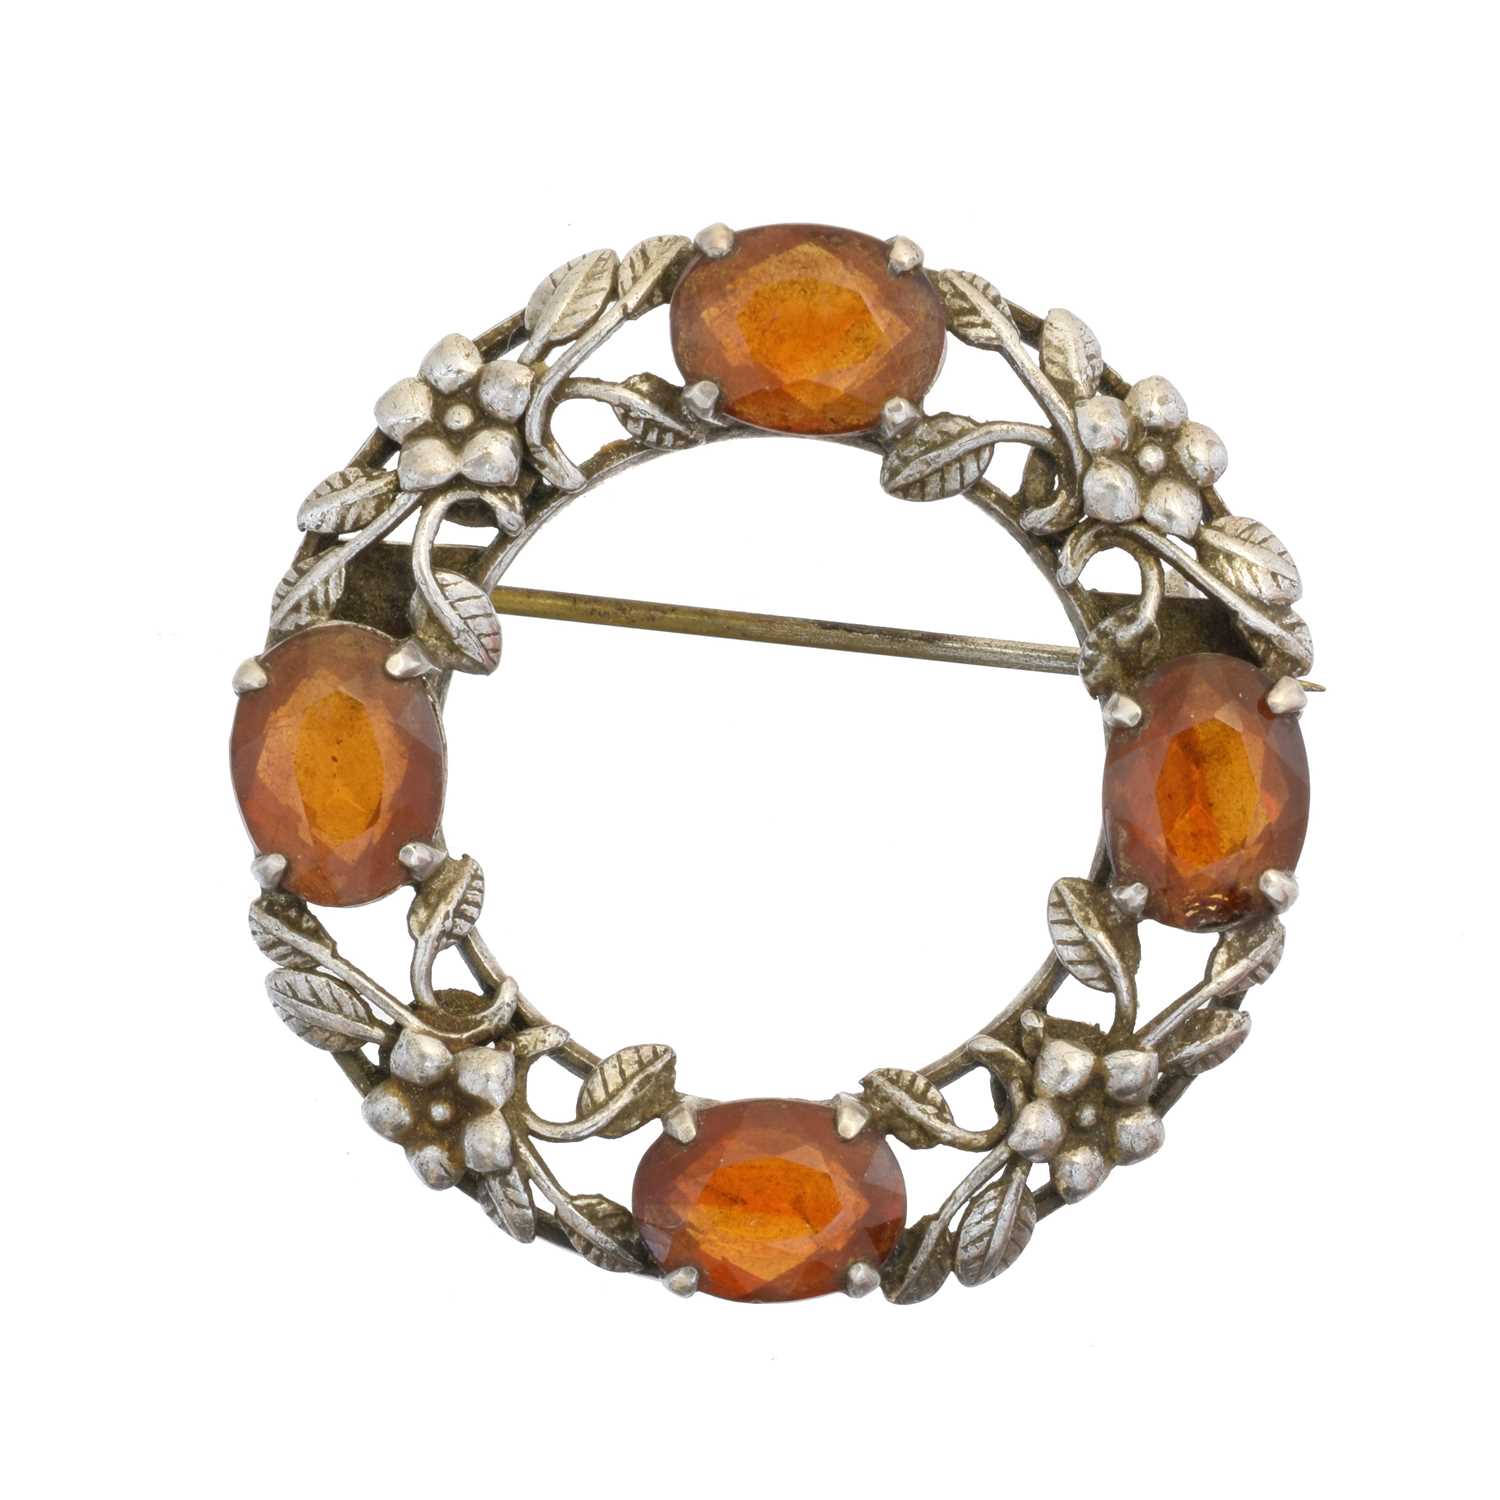 Lot 11 - An Arts & Crafts style citrine brooch